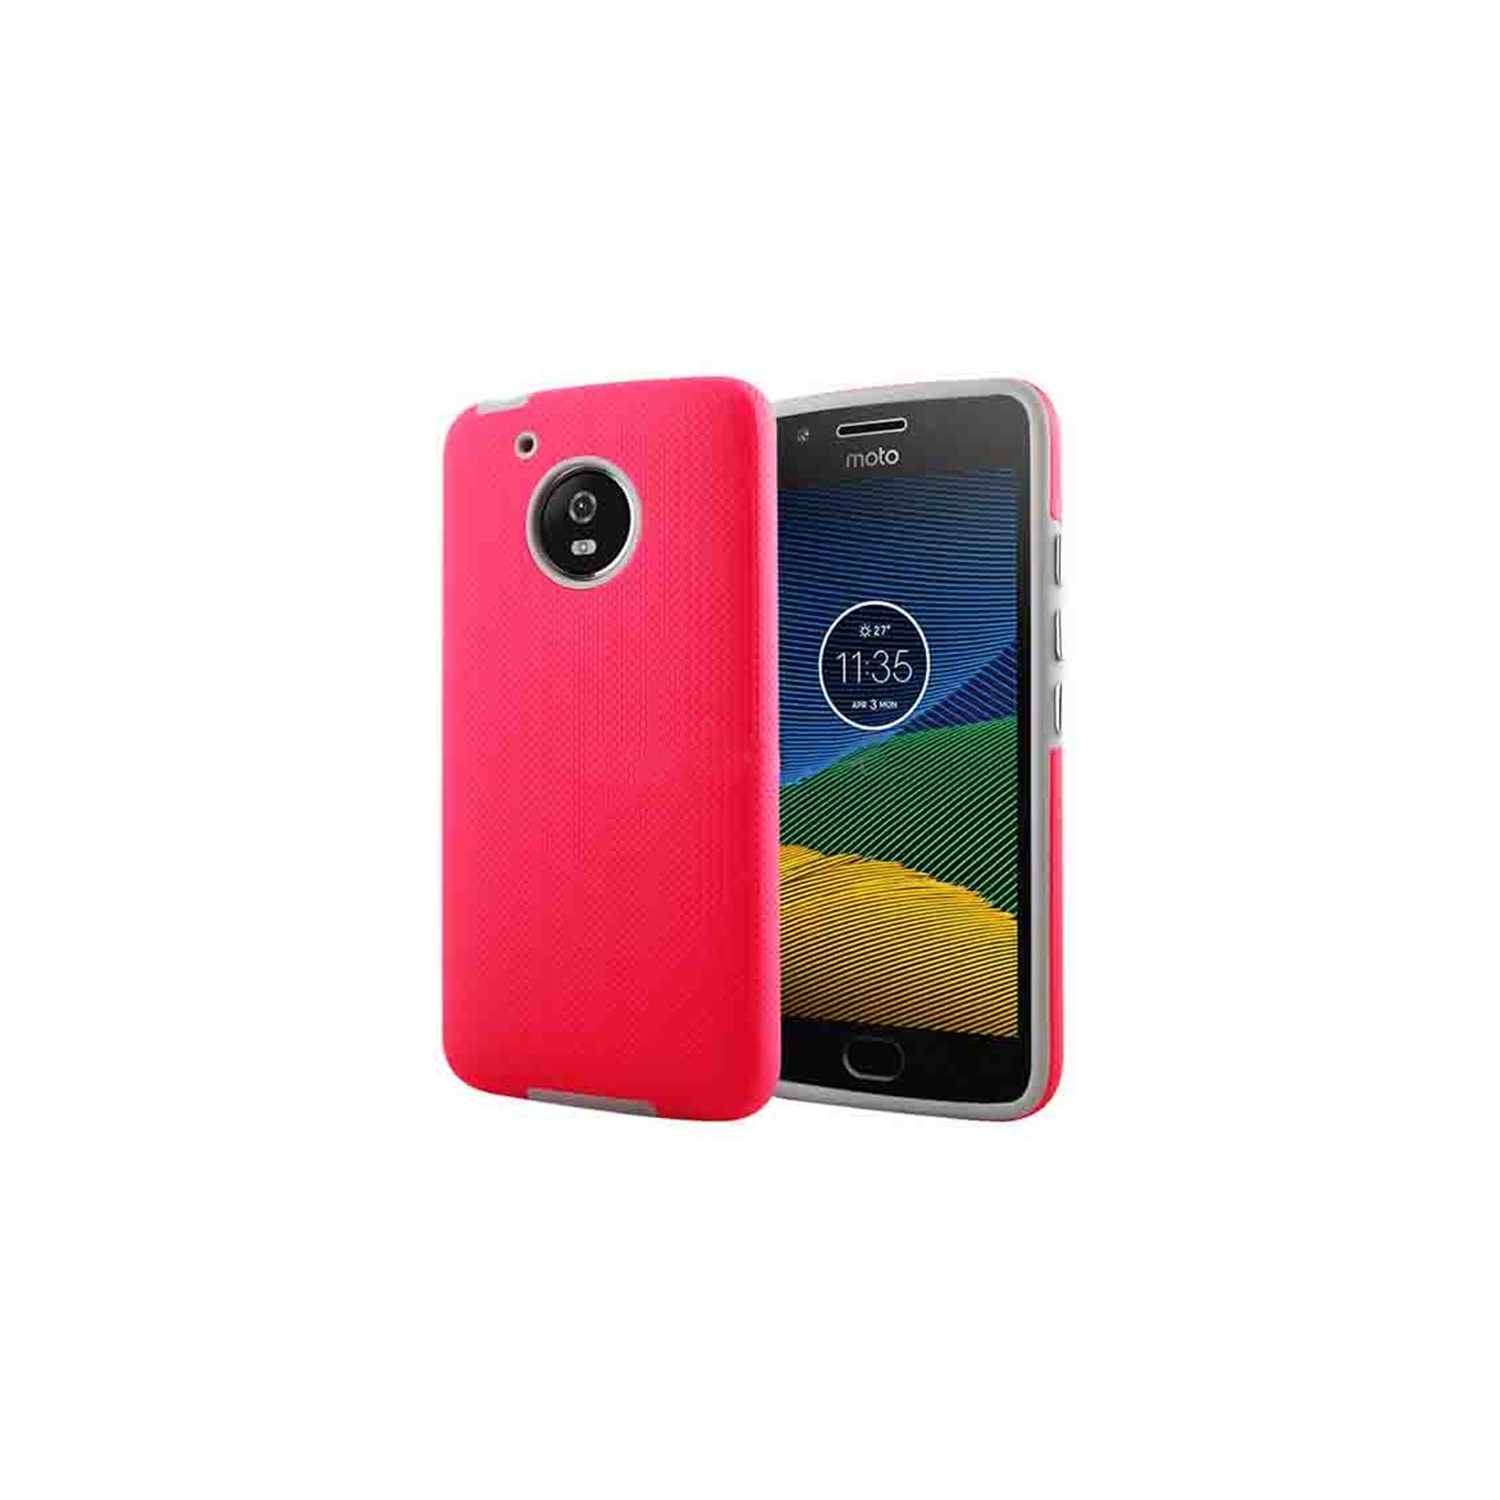 【CSmart】 Slim Fitted Hybrid Hard PC Shell Shockproof Scratch Resistant Case Cover for Motorola Moto G5, Hot Pink